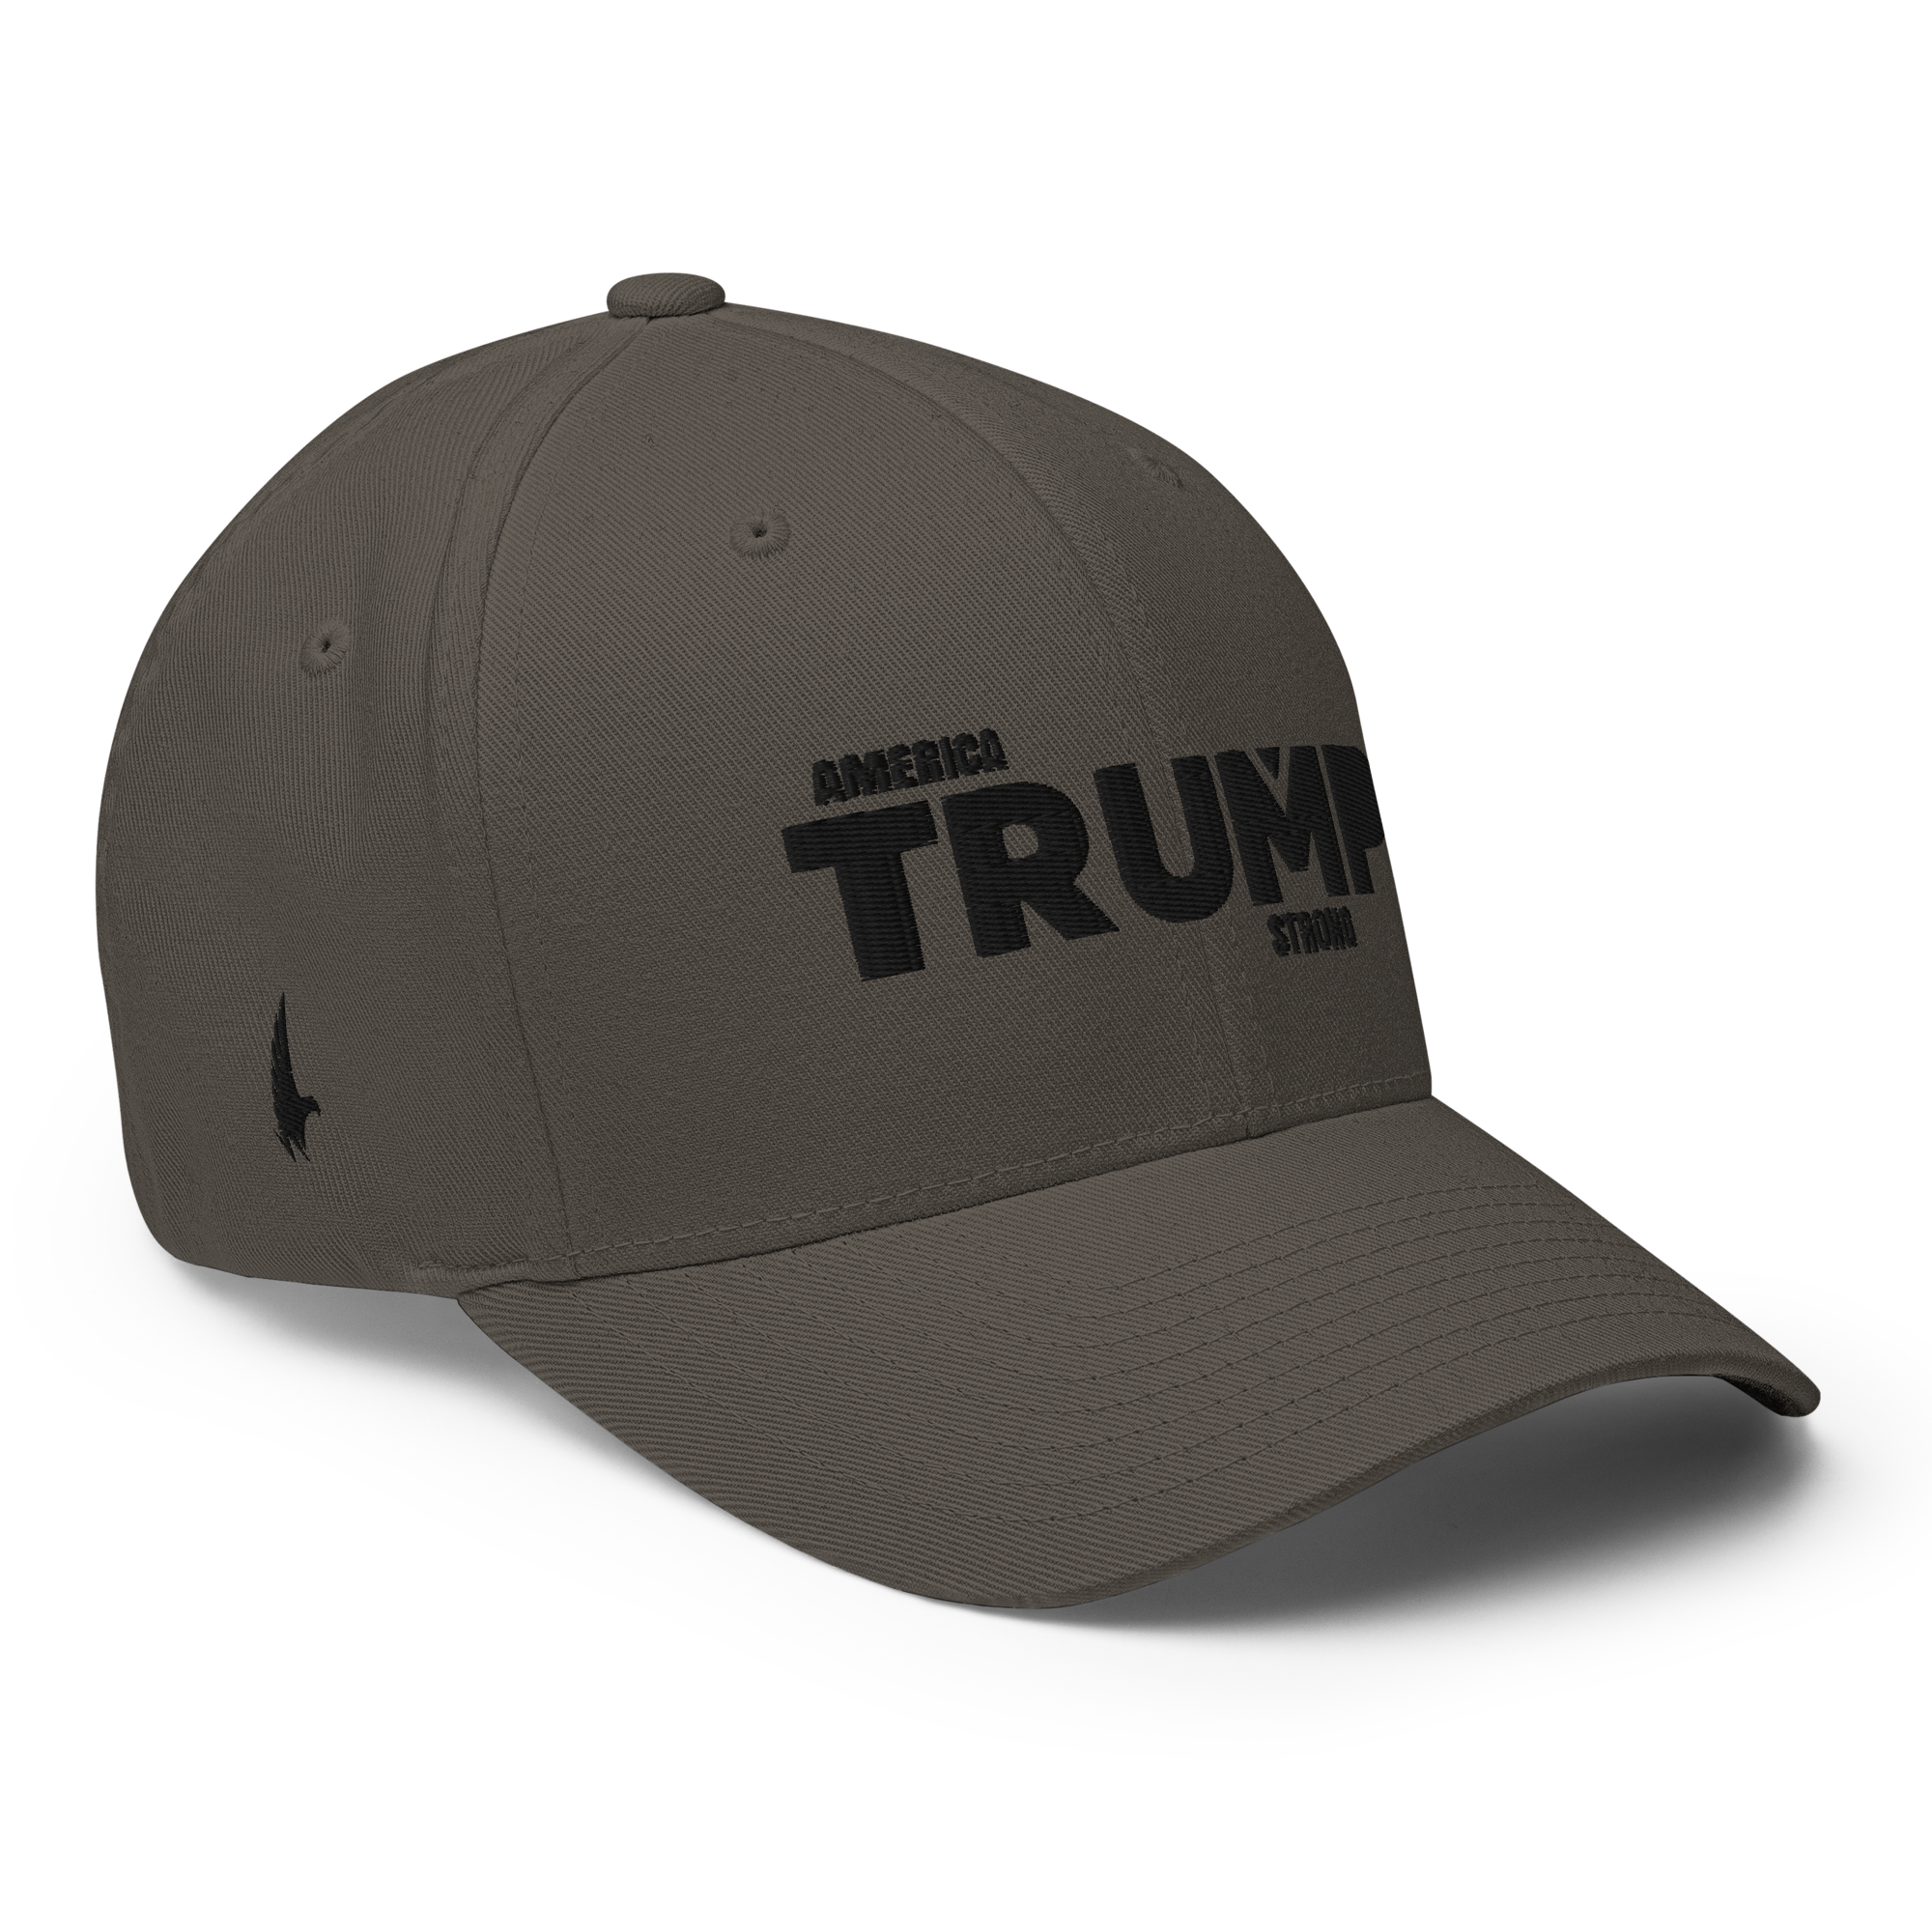 America Strong Trump Flexfit Hat - Charcoal Grey / Black Fitted - Loyalty Vibes